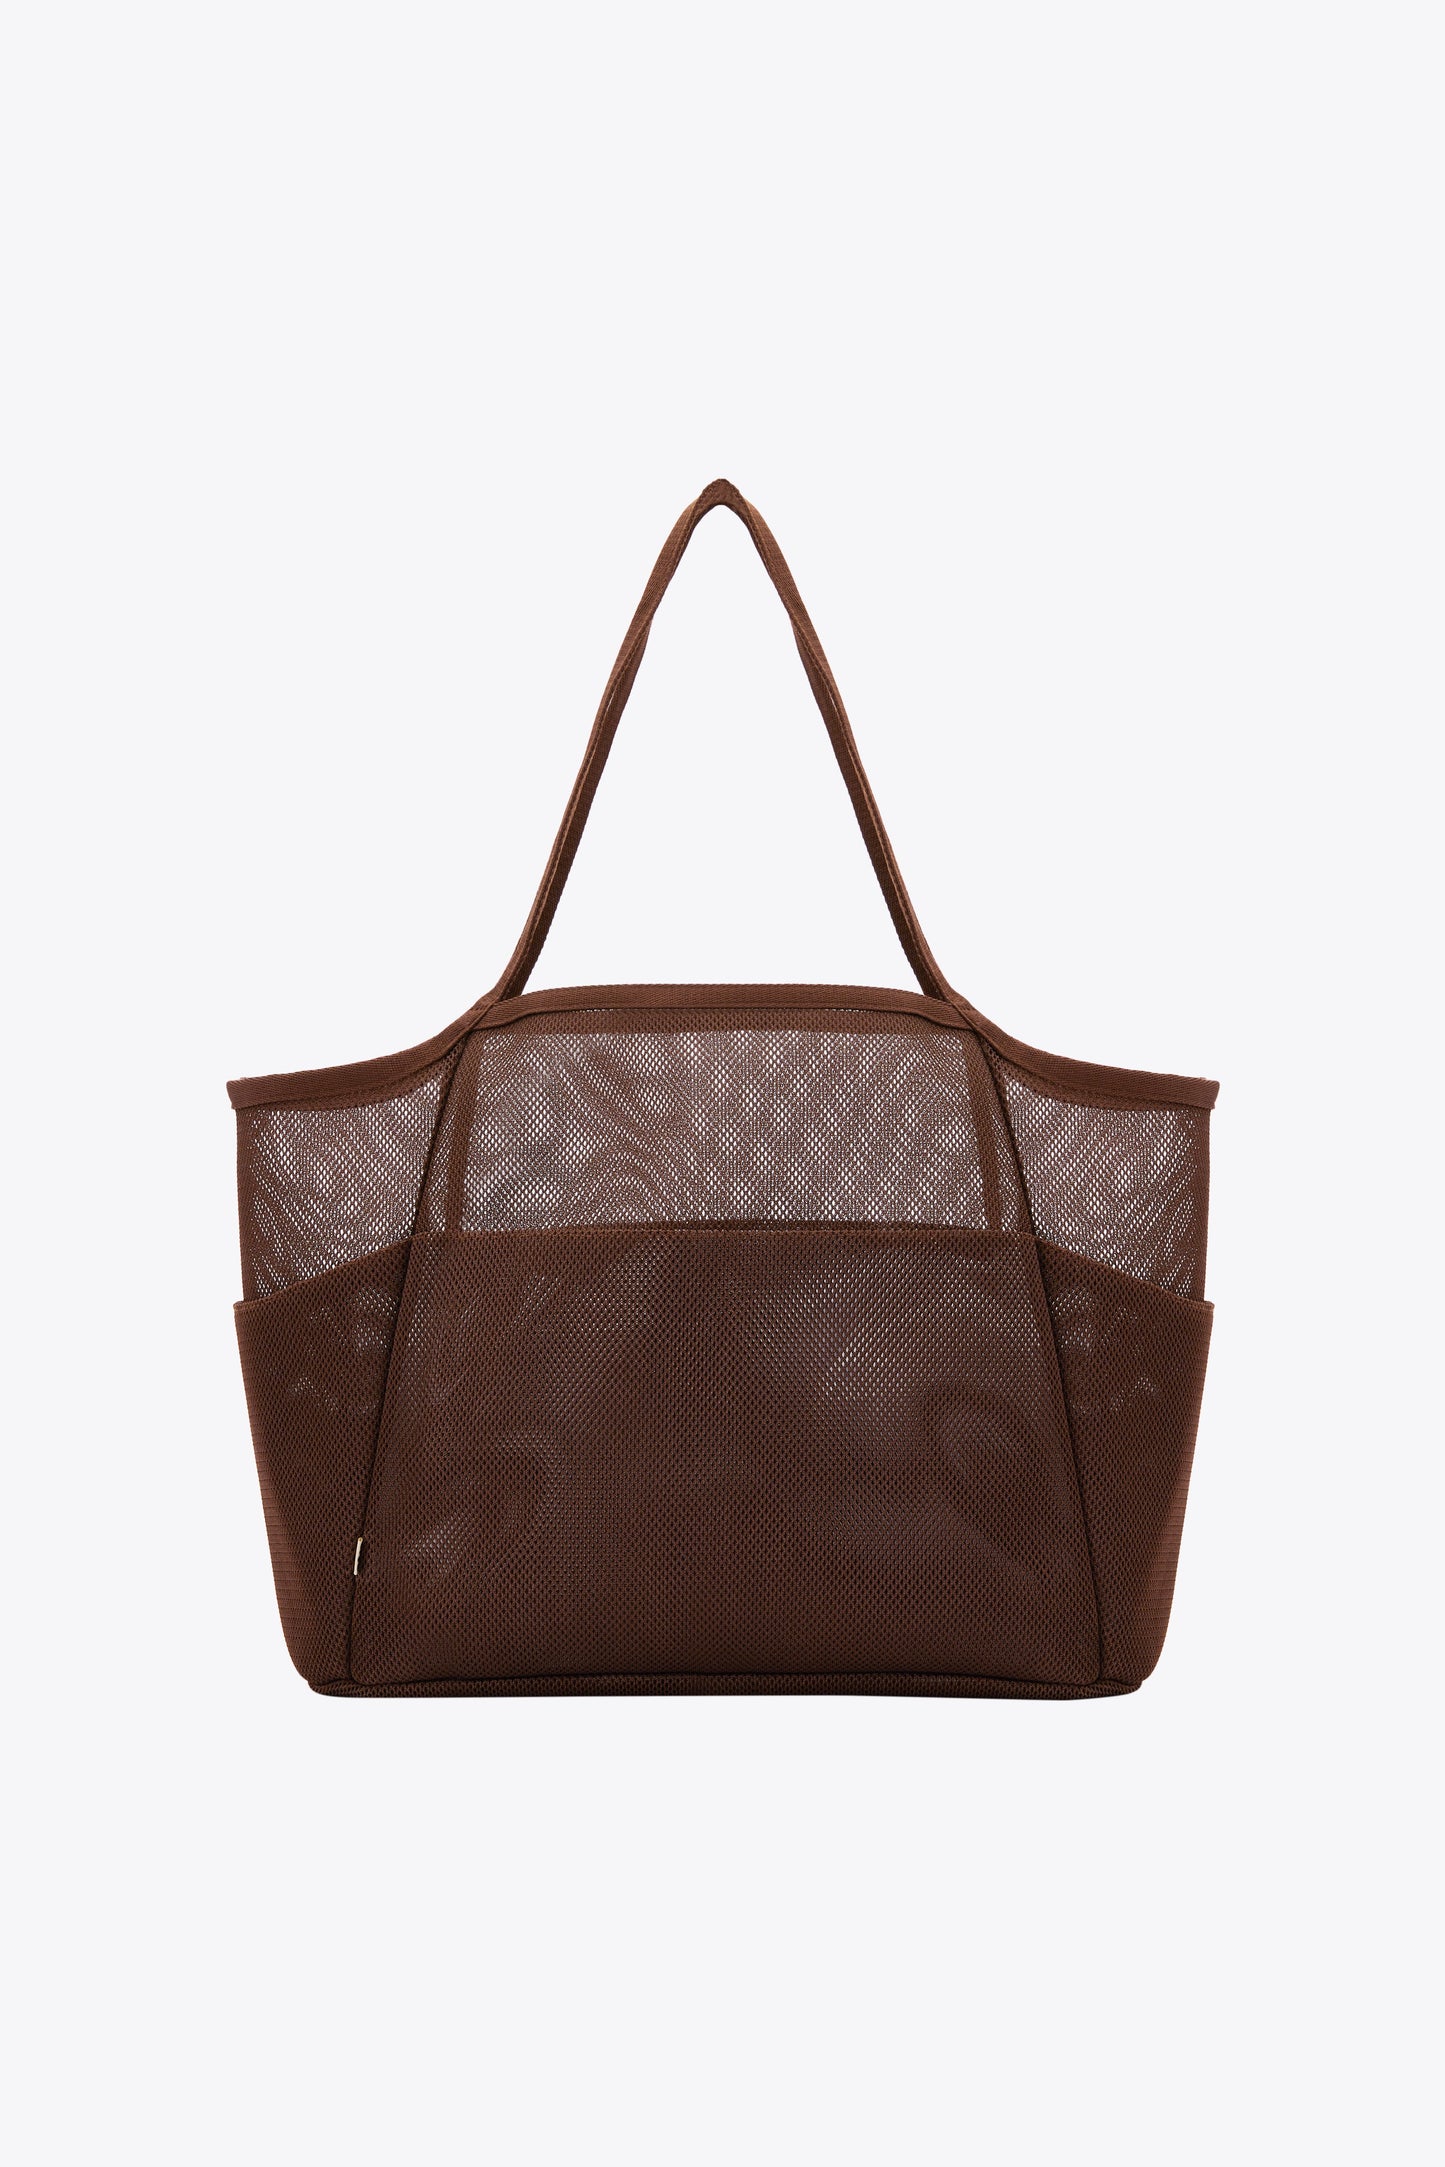 The Mesh Beach Tote in Maple